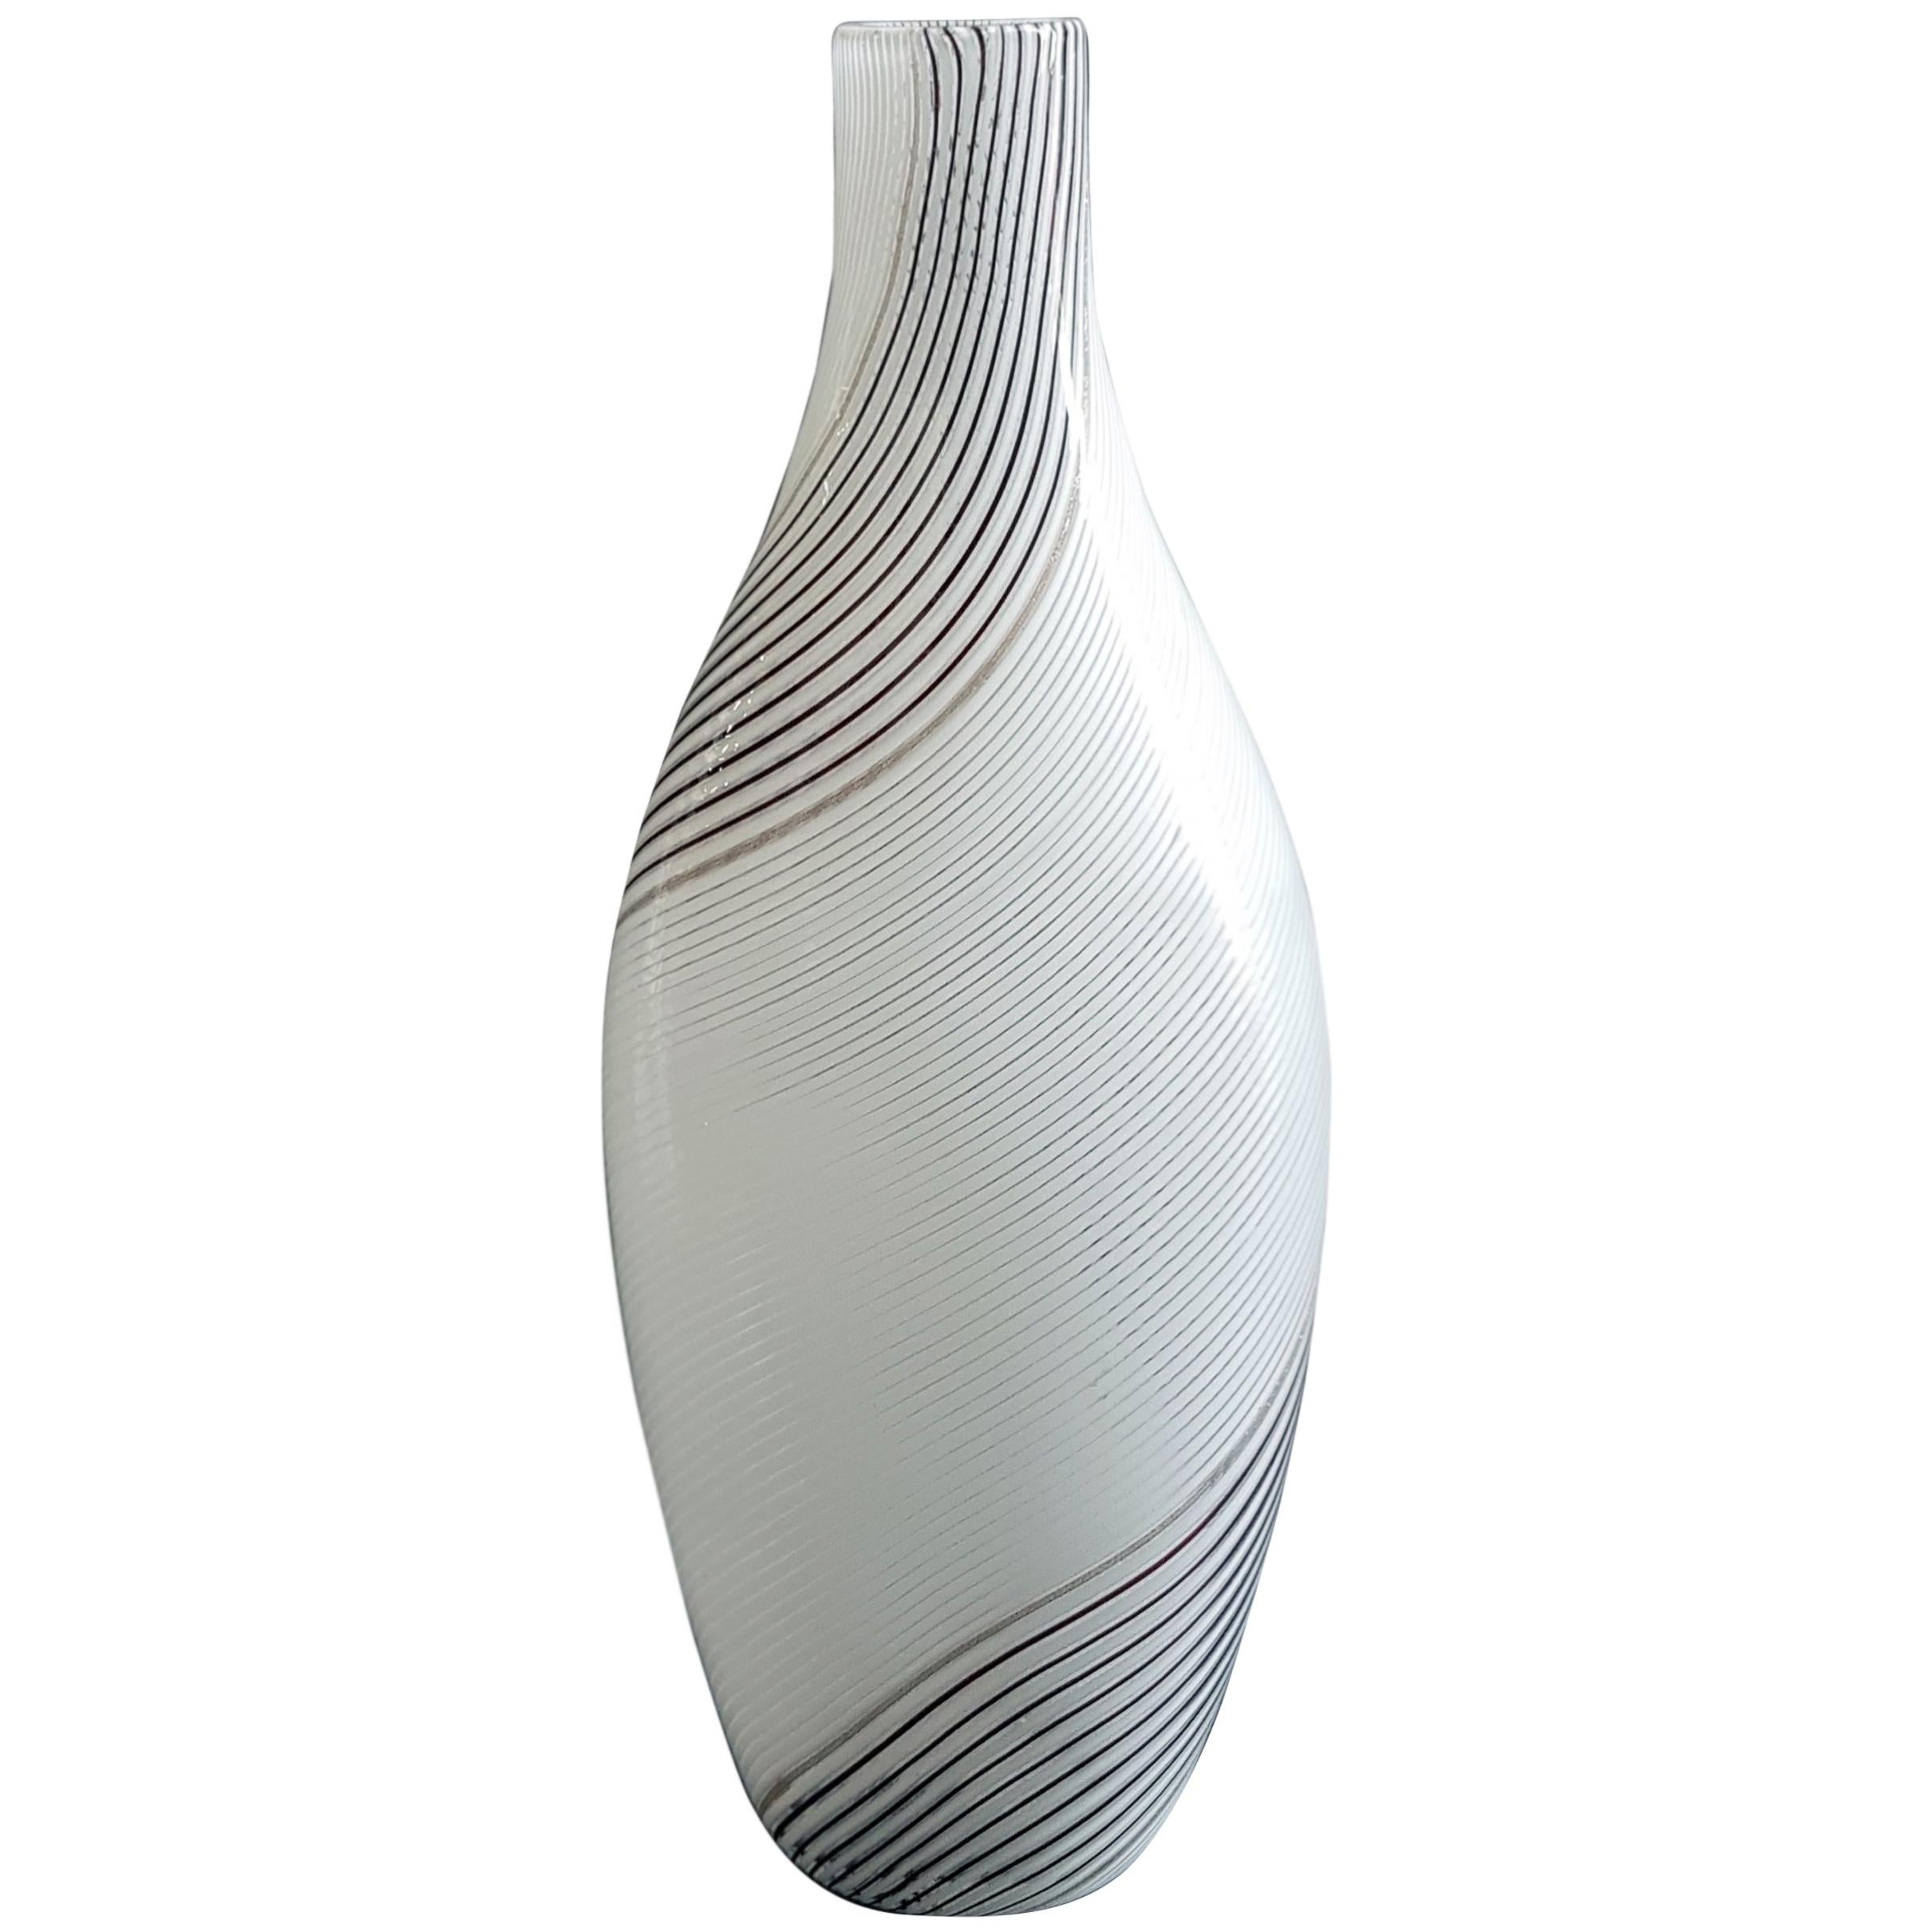 Vase model “5357” by Italian Murano designers Dino Martens and Aureliano Toso.

Vintage and rare vase with re-twisted pipes, aventurine and amethyst, handle applied with vitreous paste and gold.

Bibliography: 
- Marc Heiremans, Dino Martens,